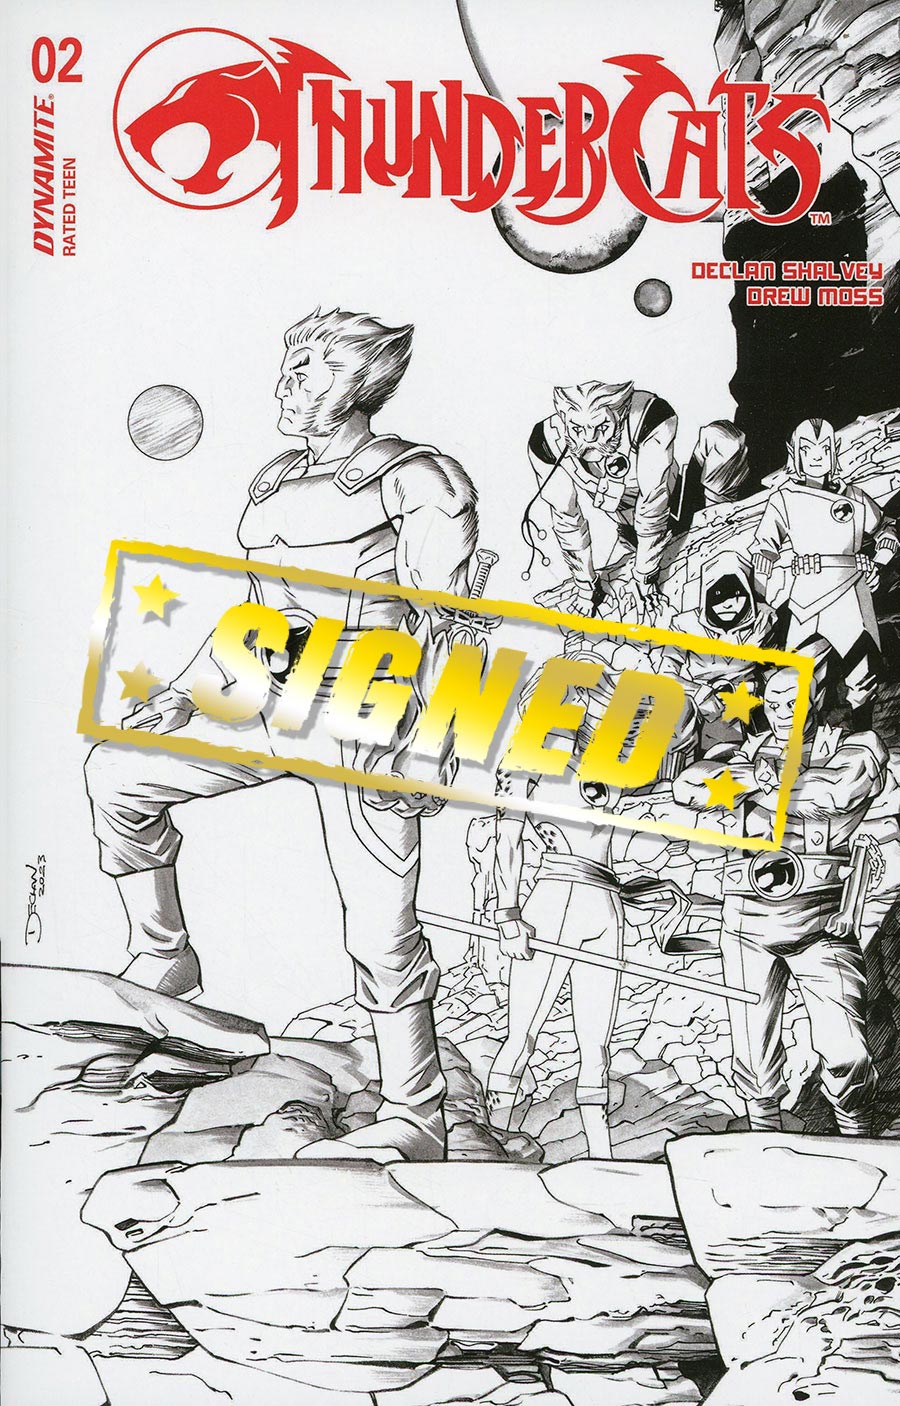 Thundercats Vol 3 #2 Cover Z-S Incentive Declan Shalvey Line Art Cover Signed By Declan Shalvey